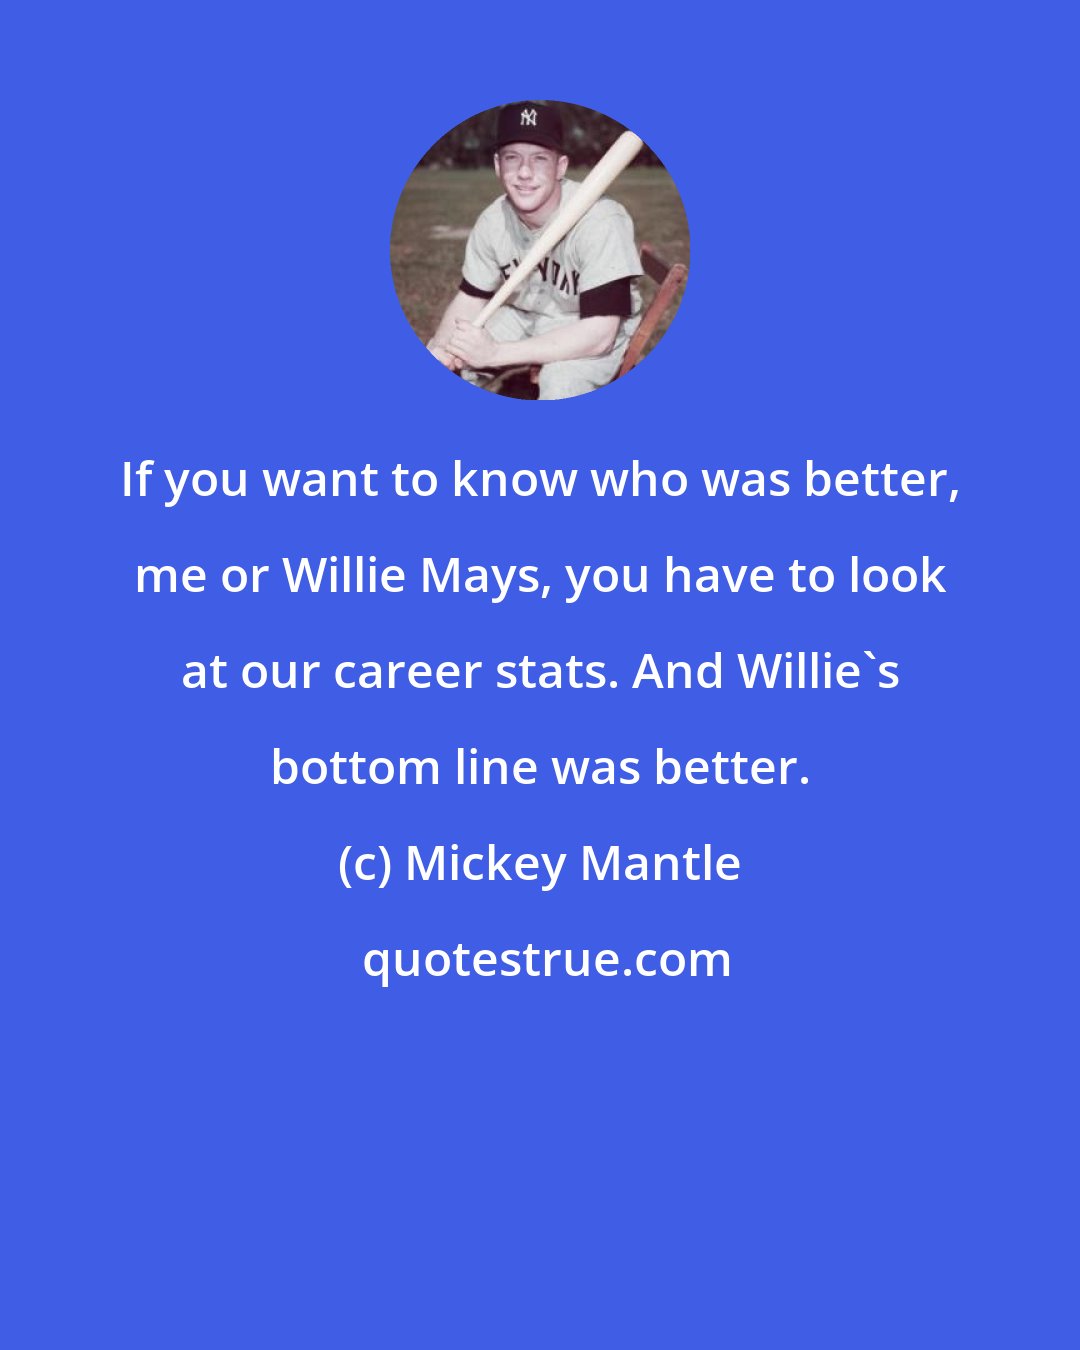 Mickey Mantle: If you want to know who was better, me or Willie Mays, you have to look at our career stats. And Willie's bottom line was better.